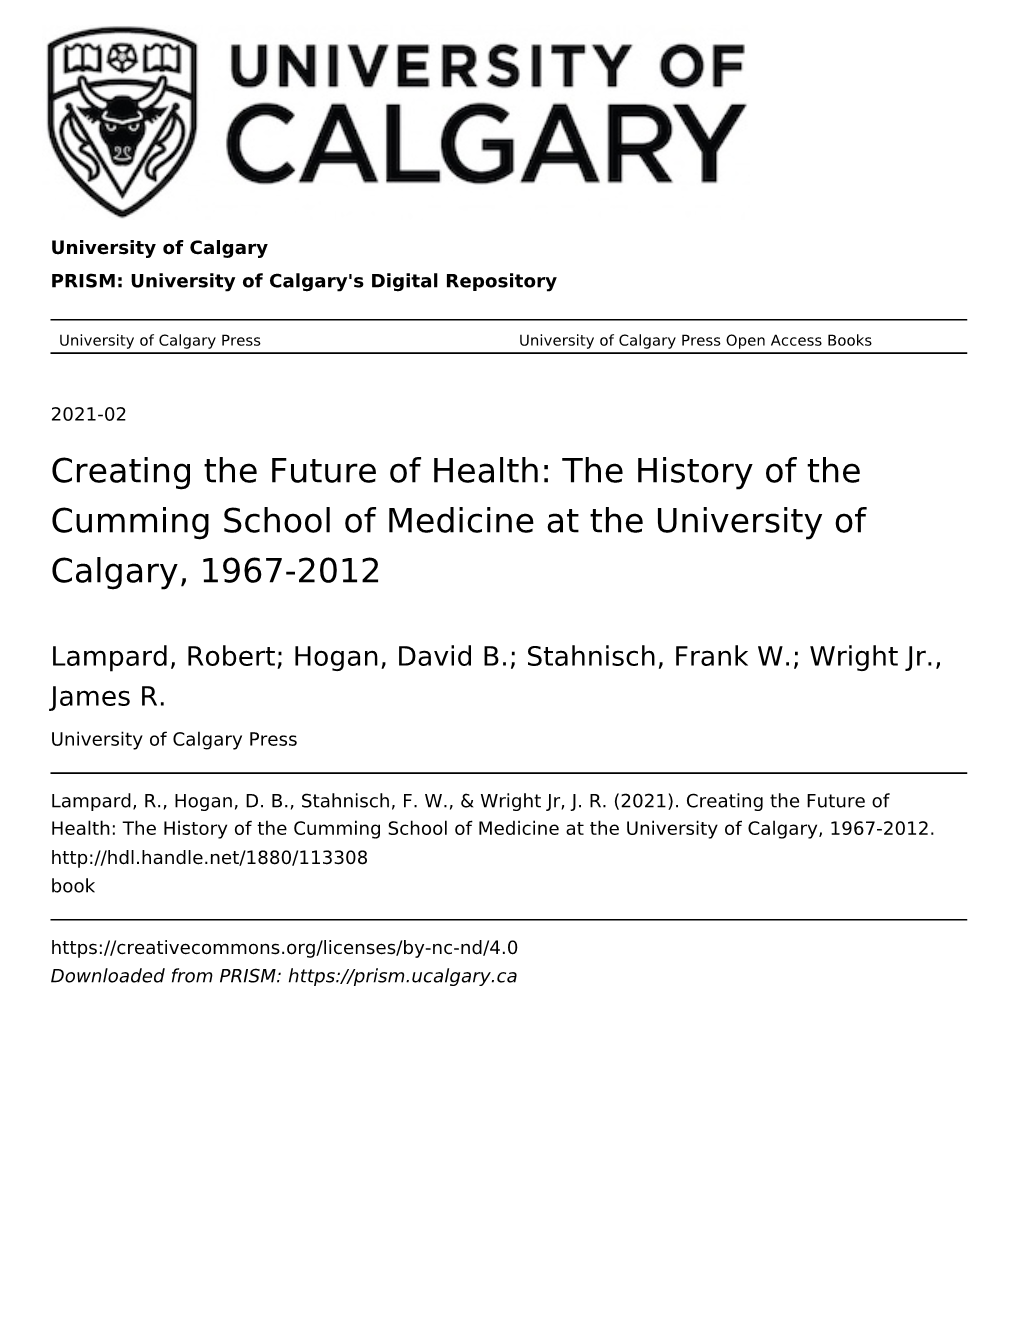 Creating the Future of Health: the History of the Cumming School of Medicine at the University of Calgary, 1967-2012